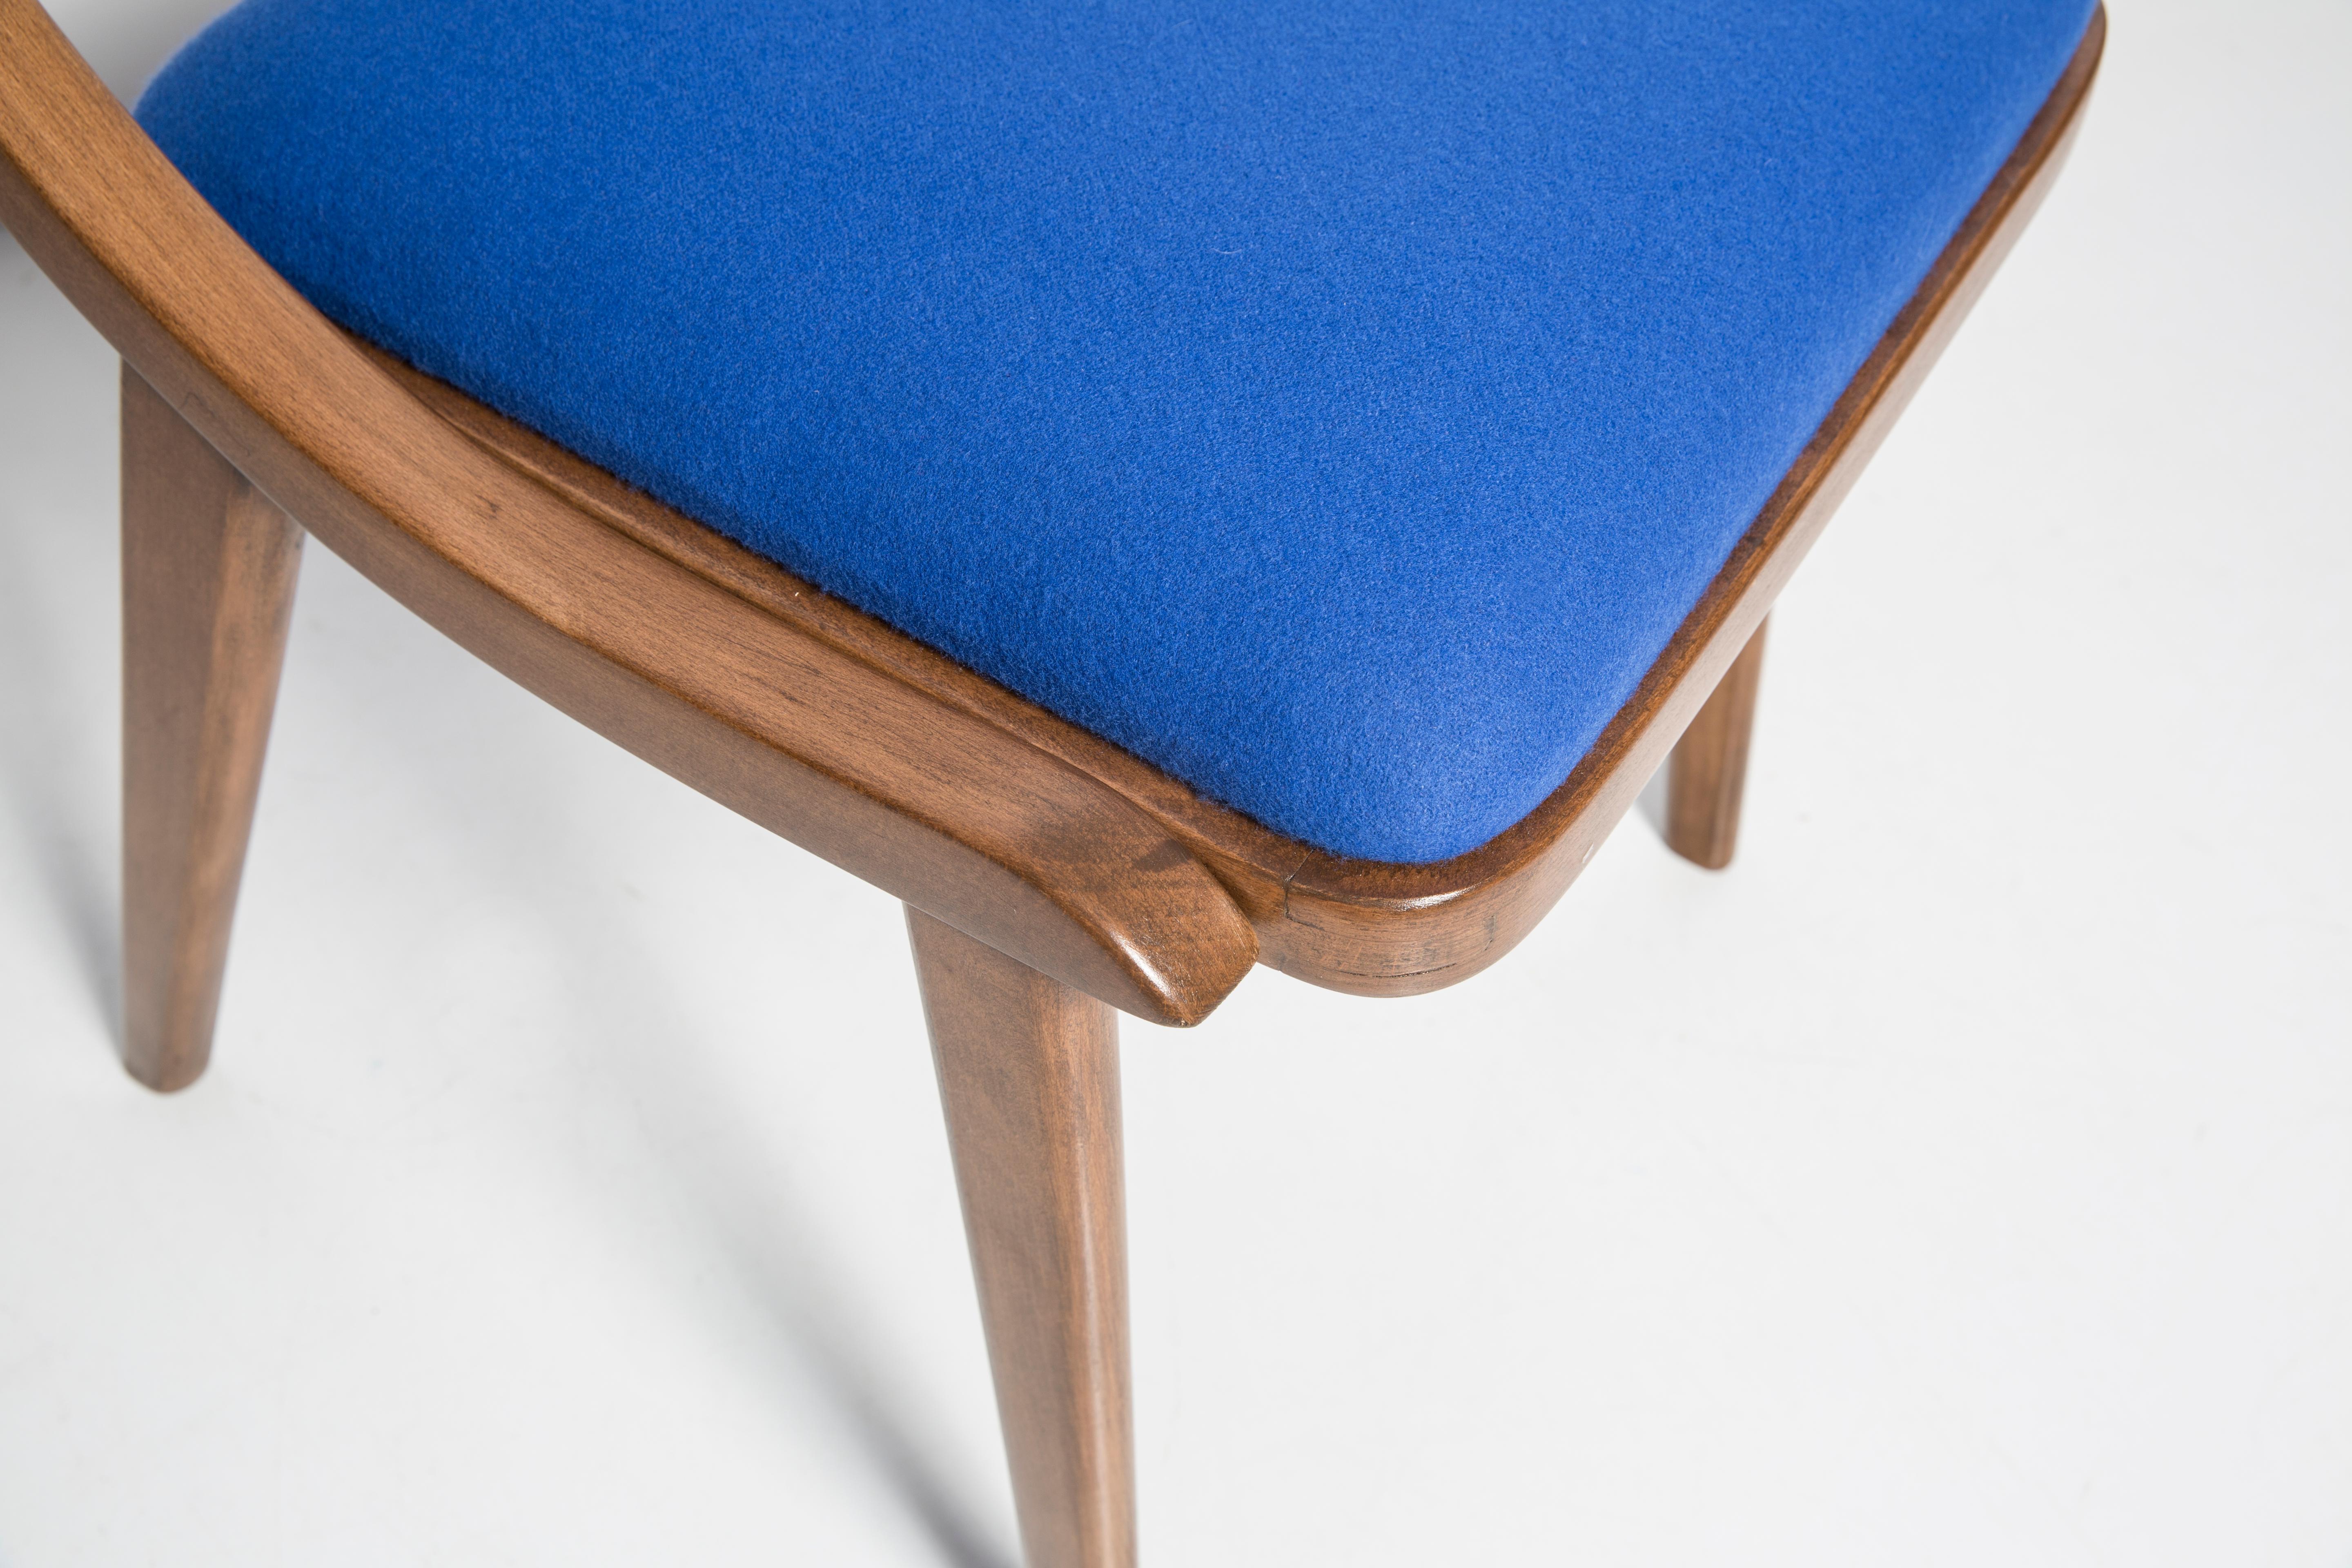 Hand-Crafted Mid Century Modern Bumerang Chair, Royal Blue Wool, Poland, 1960s For Sale